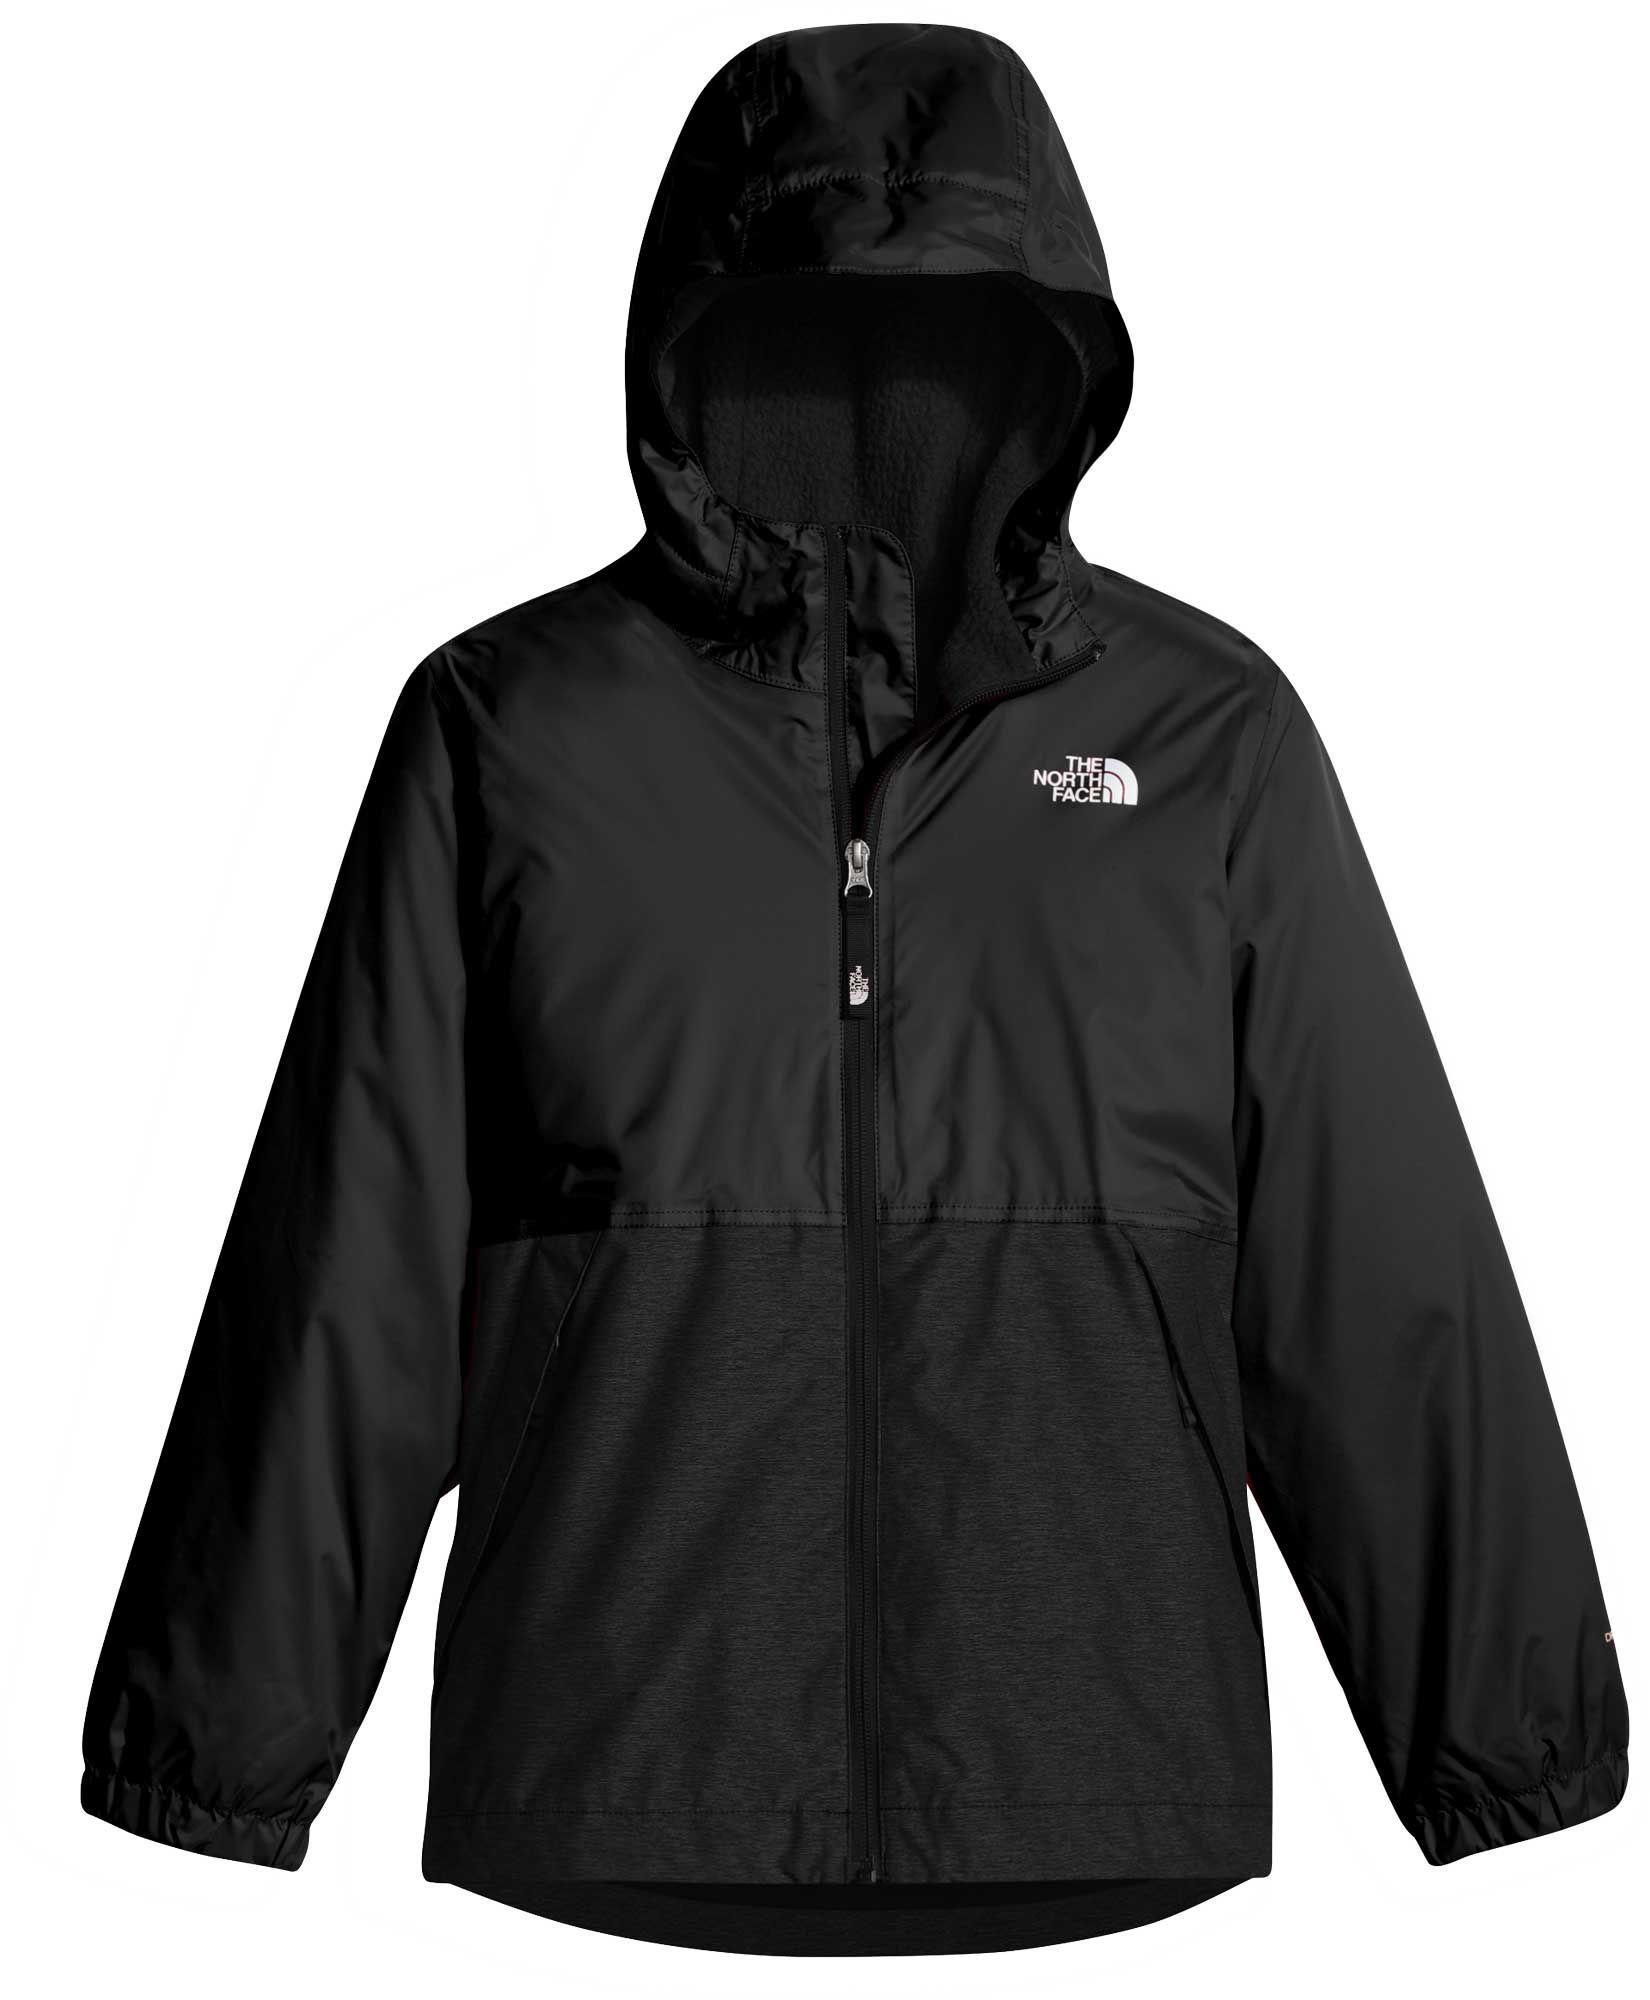 north face jackets at dick's sporting goods